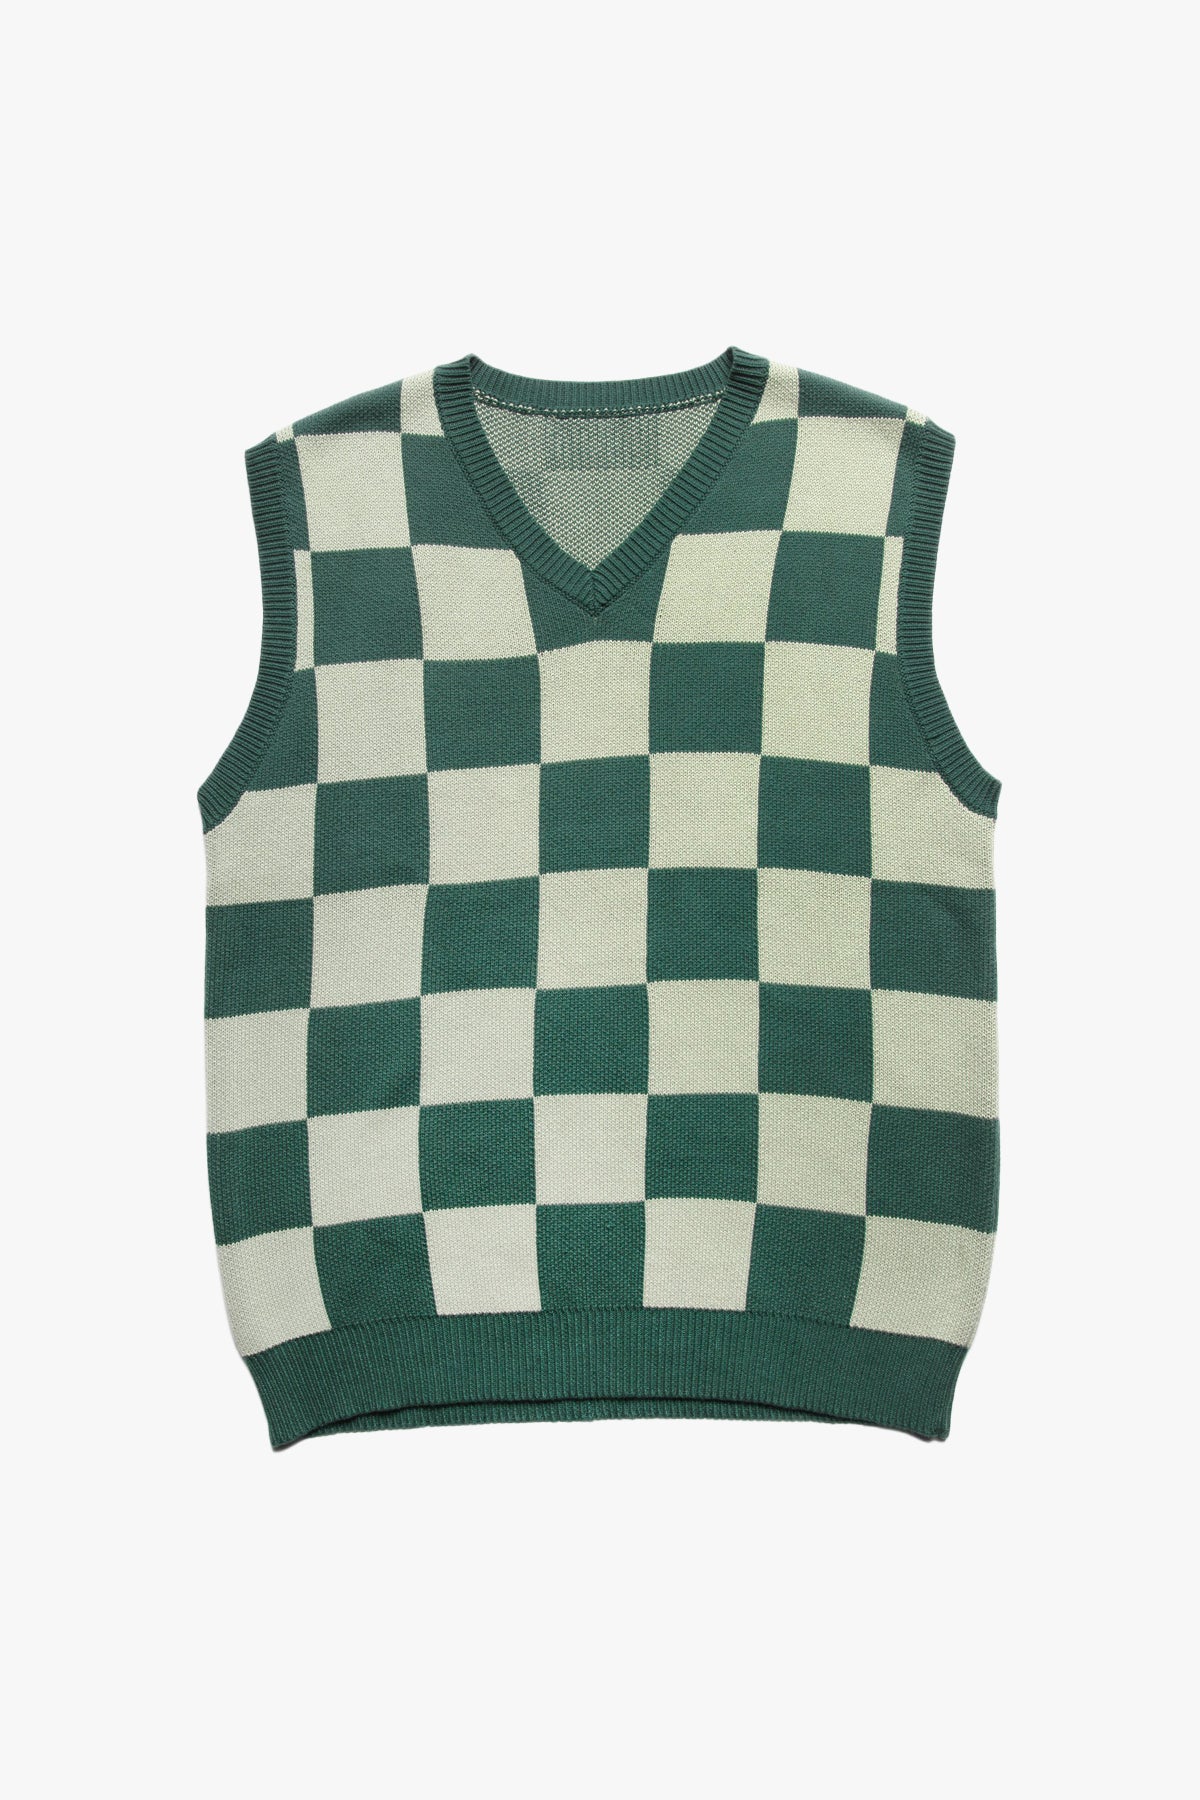 Service Works - Checkerboard Knitted Vest - Green